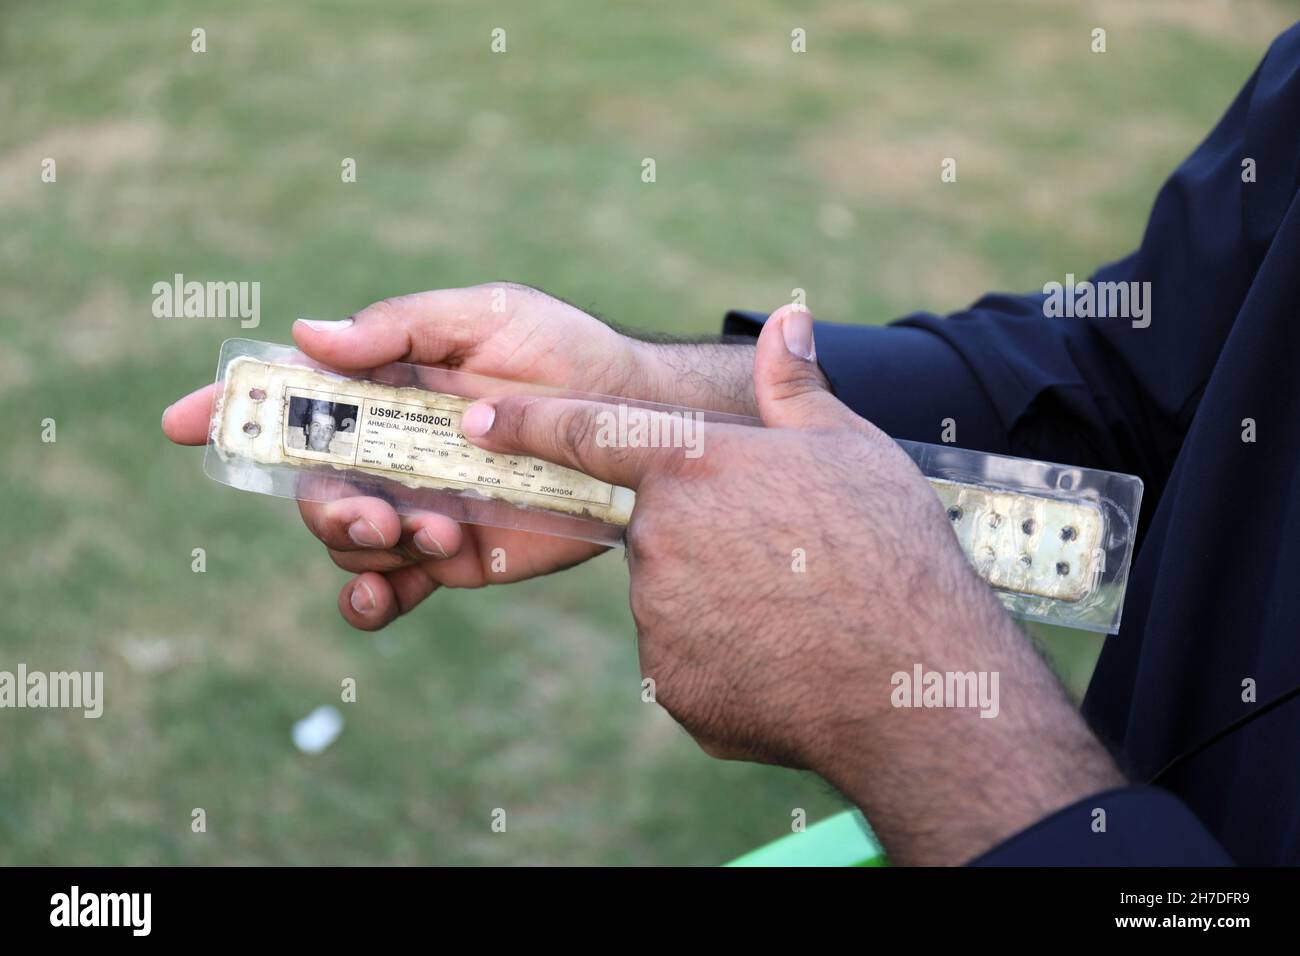 Baghdad. 22nd Nov, 2021. Alaah Karim Ahmed shows his prison identification bracelet in Duluiyah town of Salahuddin province, Iraq, Nov. 2, 2021. TO GO WITH: 'Feature: Former prisoner in Abu Ghraib reveals U.S. brutal crimes in Iraq' Credit: Xinhua/Alamy Live News Stock Photo